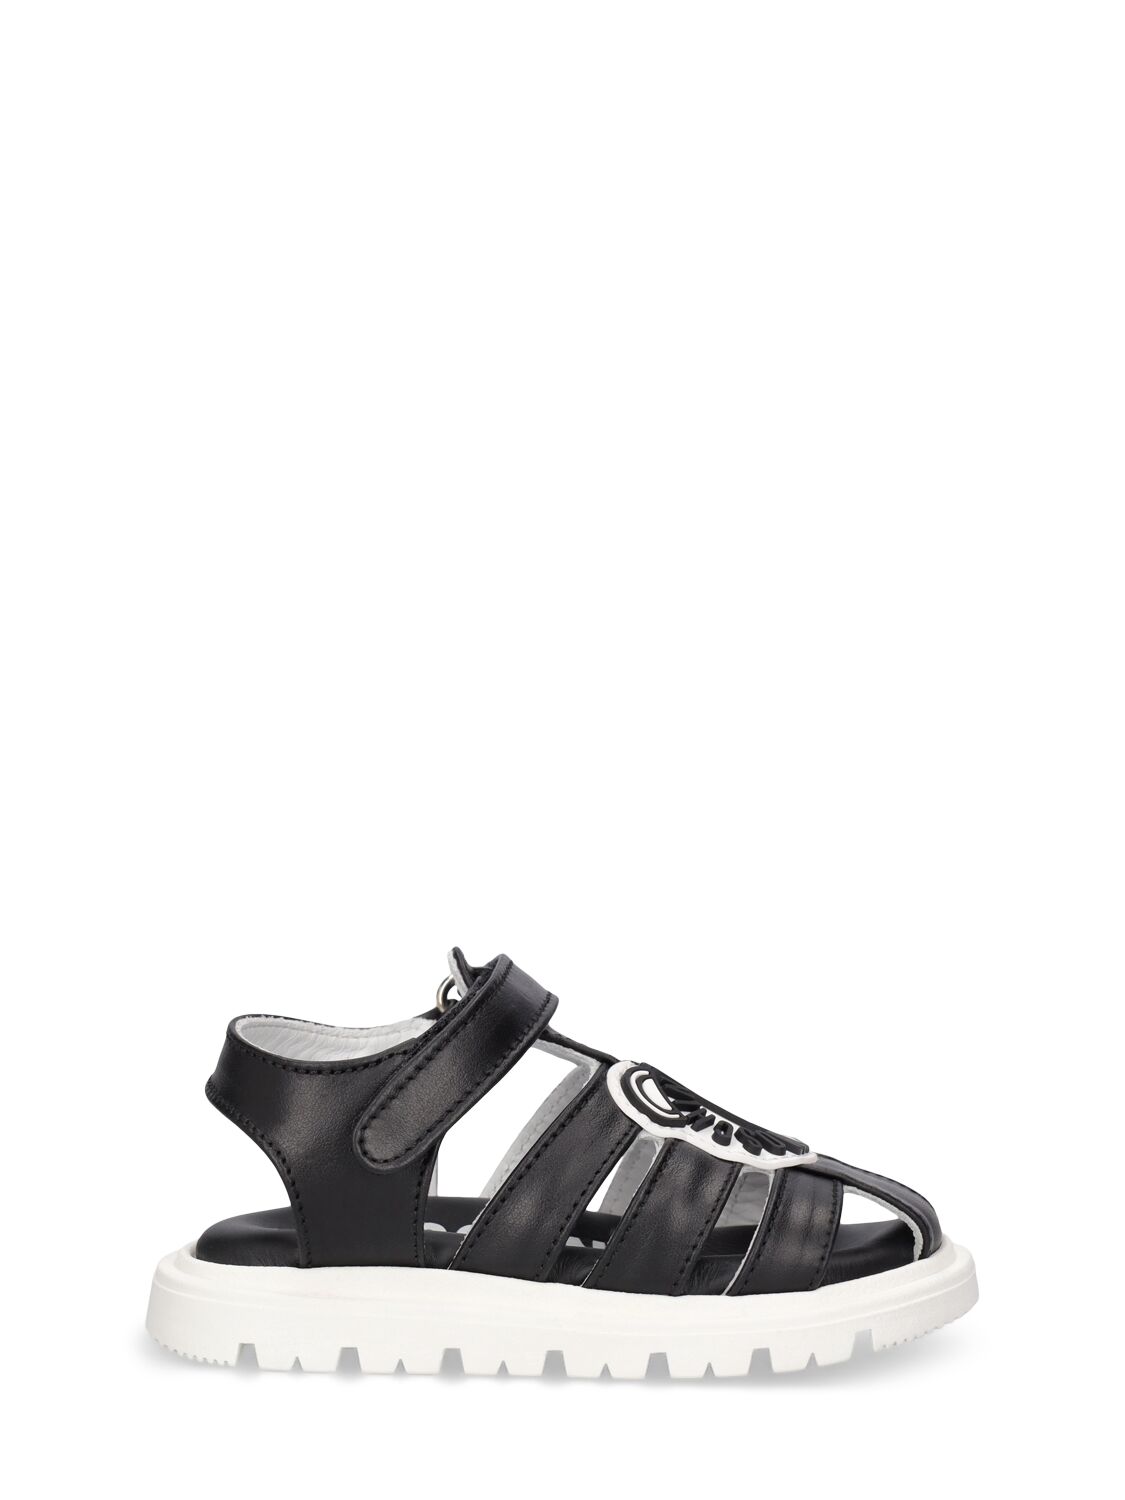 Moschino Kids' Logo Print Leather Sandals W/teddy Patch In Black